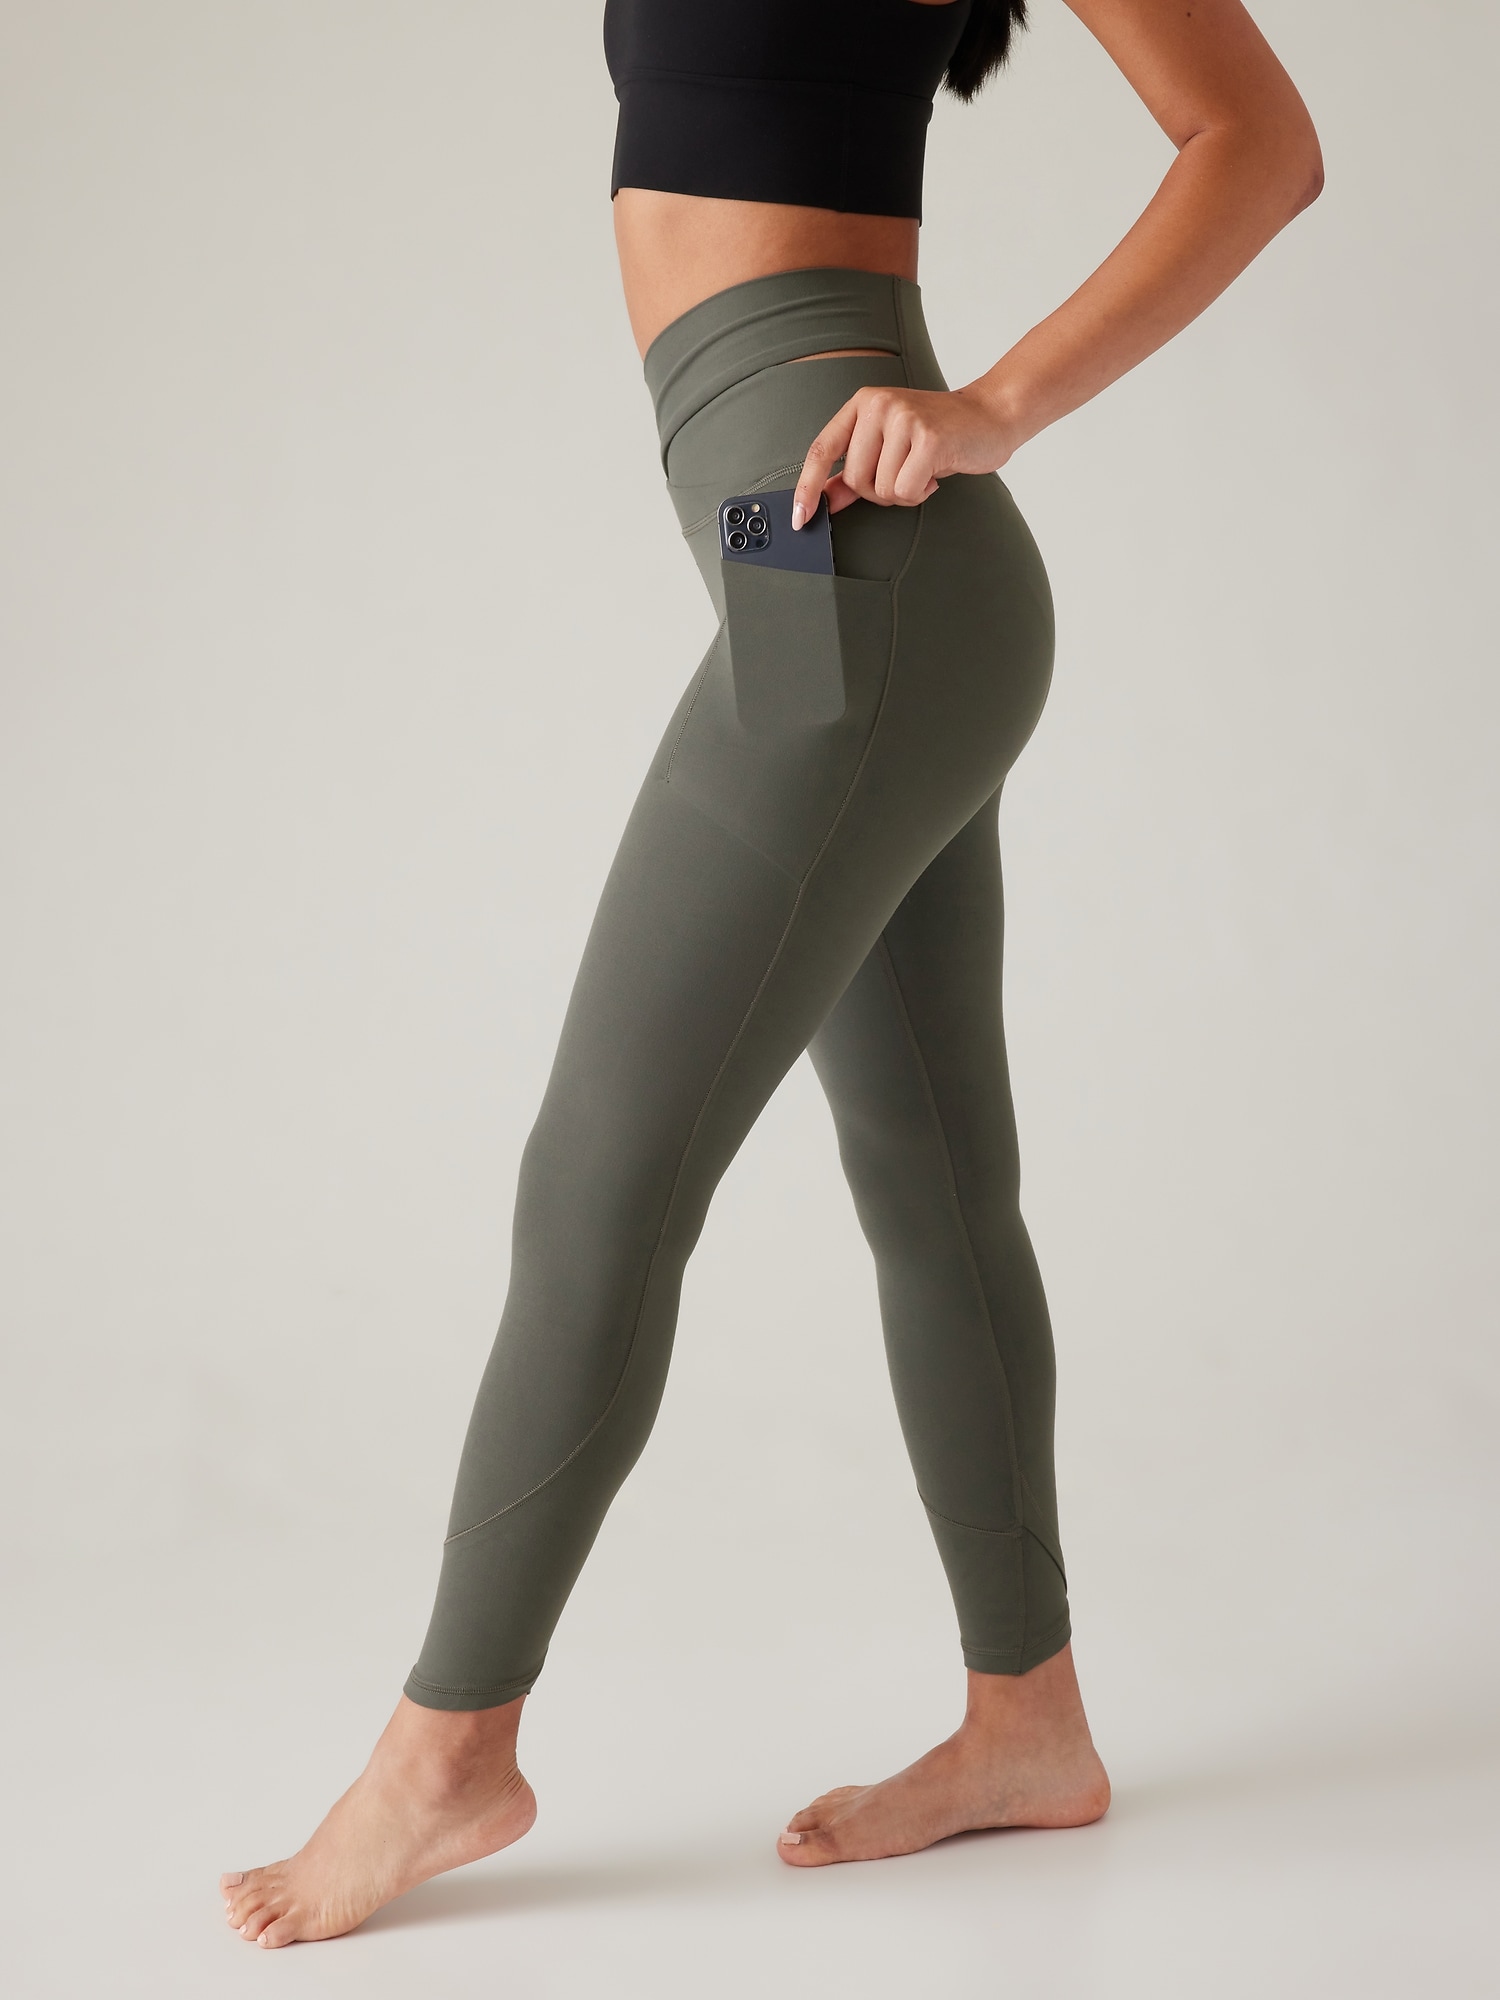 Sage Green Crossover Legging With Pockets